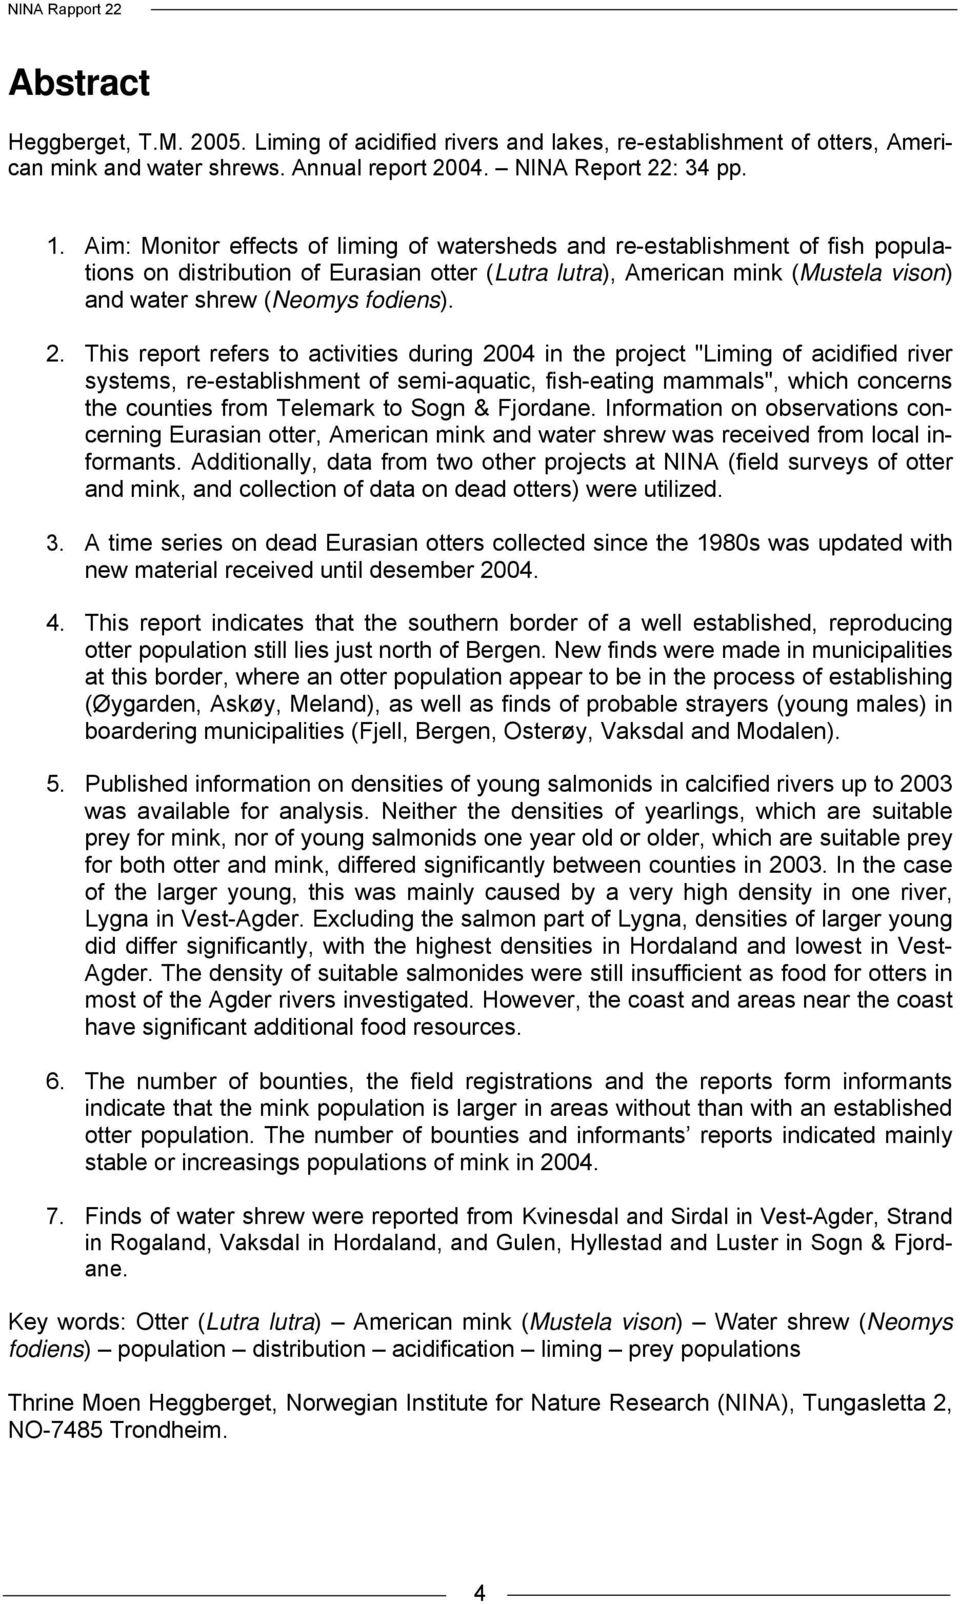 2. This report refers to activities during 2004 in the project "Liming of acidified river systems, re-establishment of semi-aquatic, fish-eating mammals", which concerns the counties from Telemark to